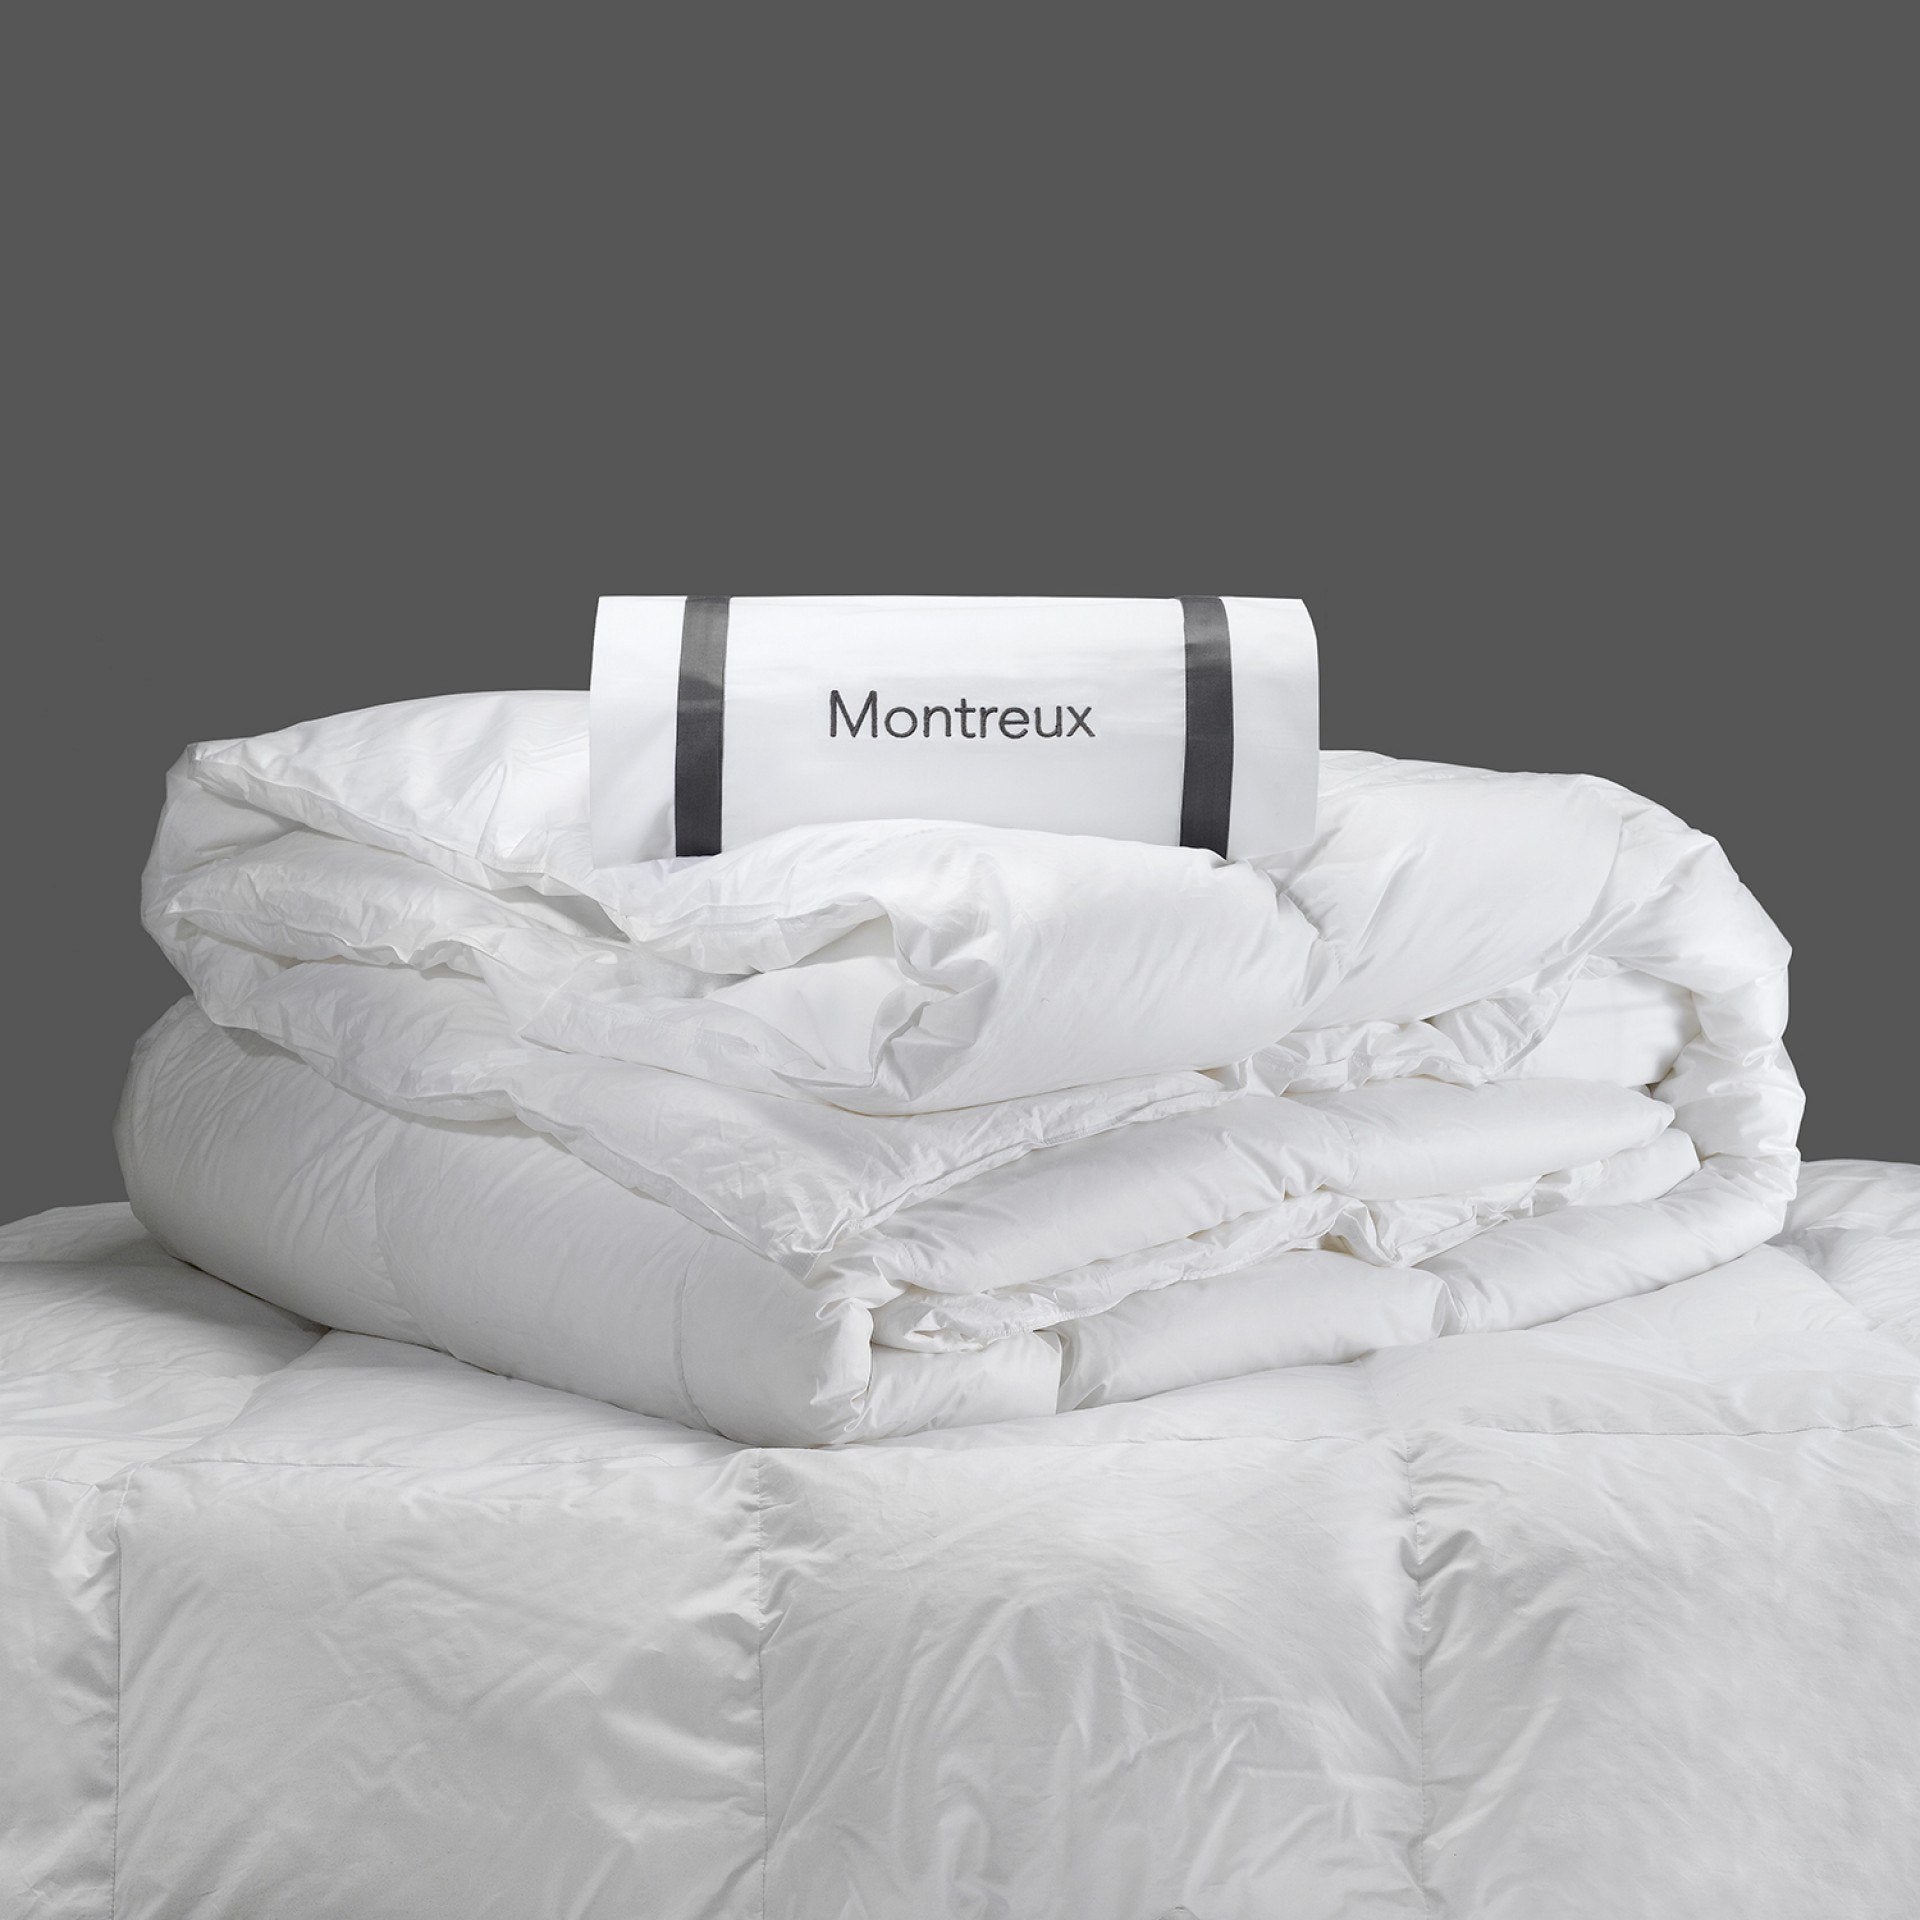 Montreux Down Comforter by Matouk